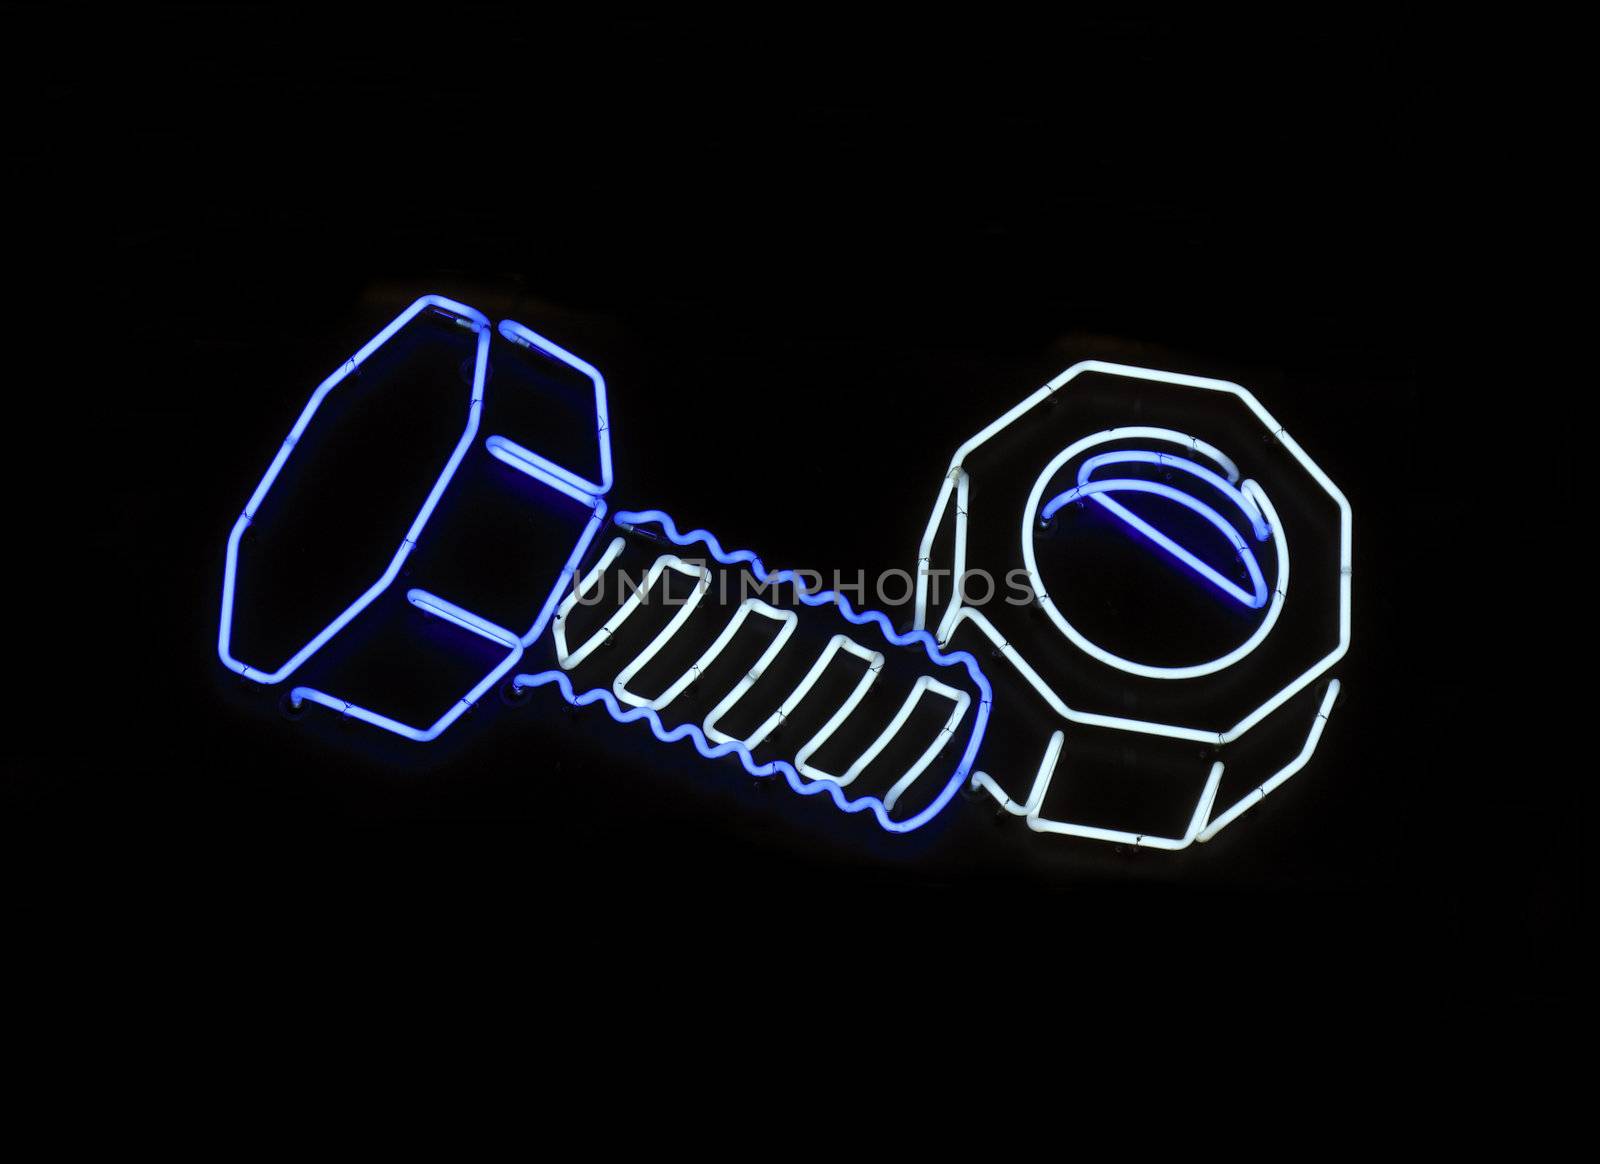 Neon sign shaped like a nut and bolt